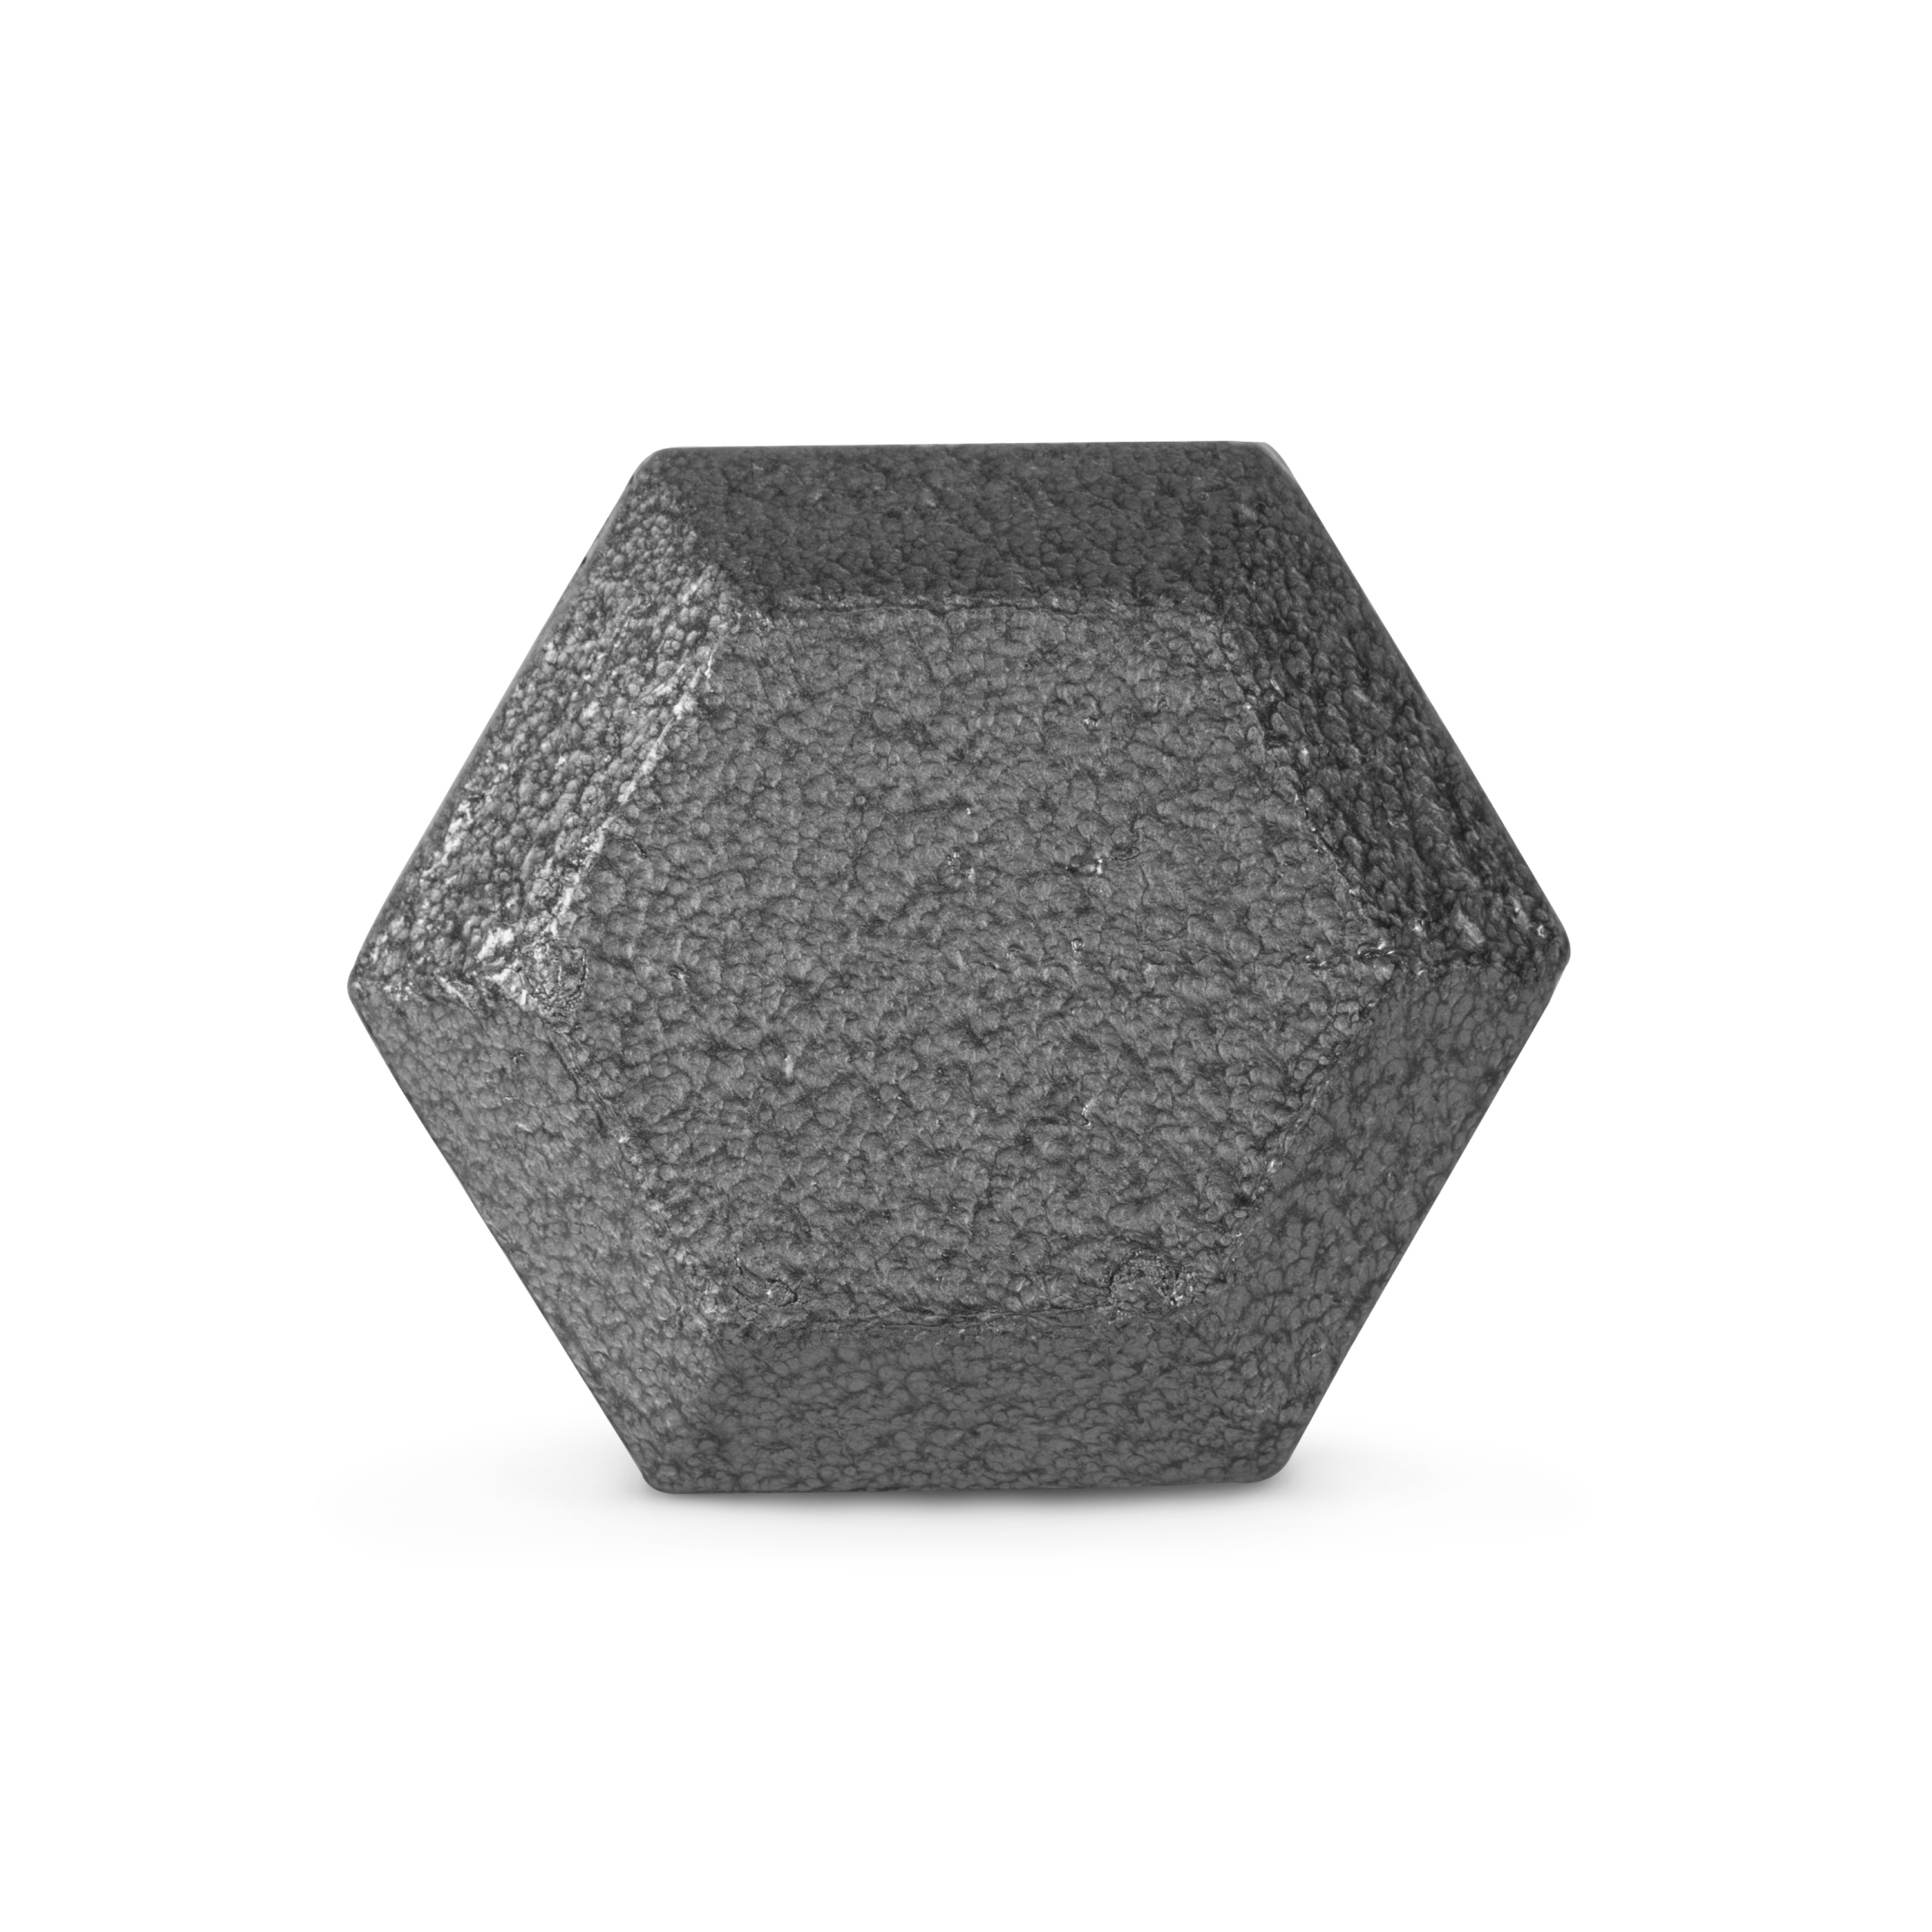 CAP Barbell 60lb Cast Iron Hex Dumbbell, Single - image 5 of 7